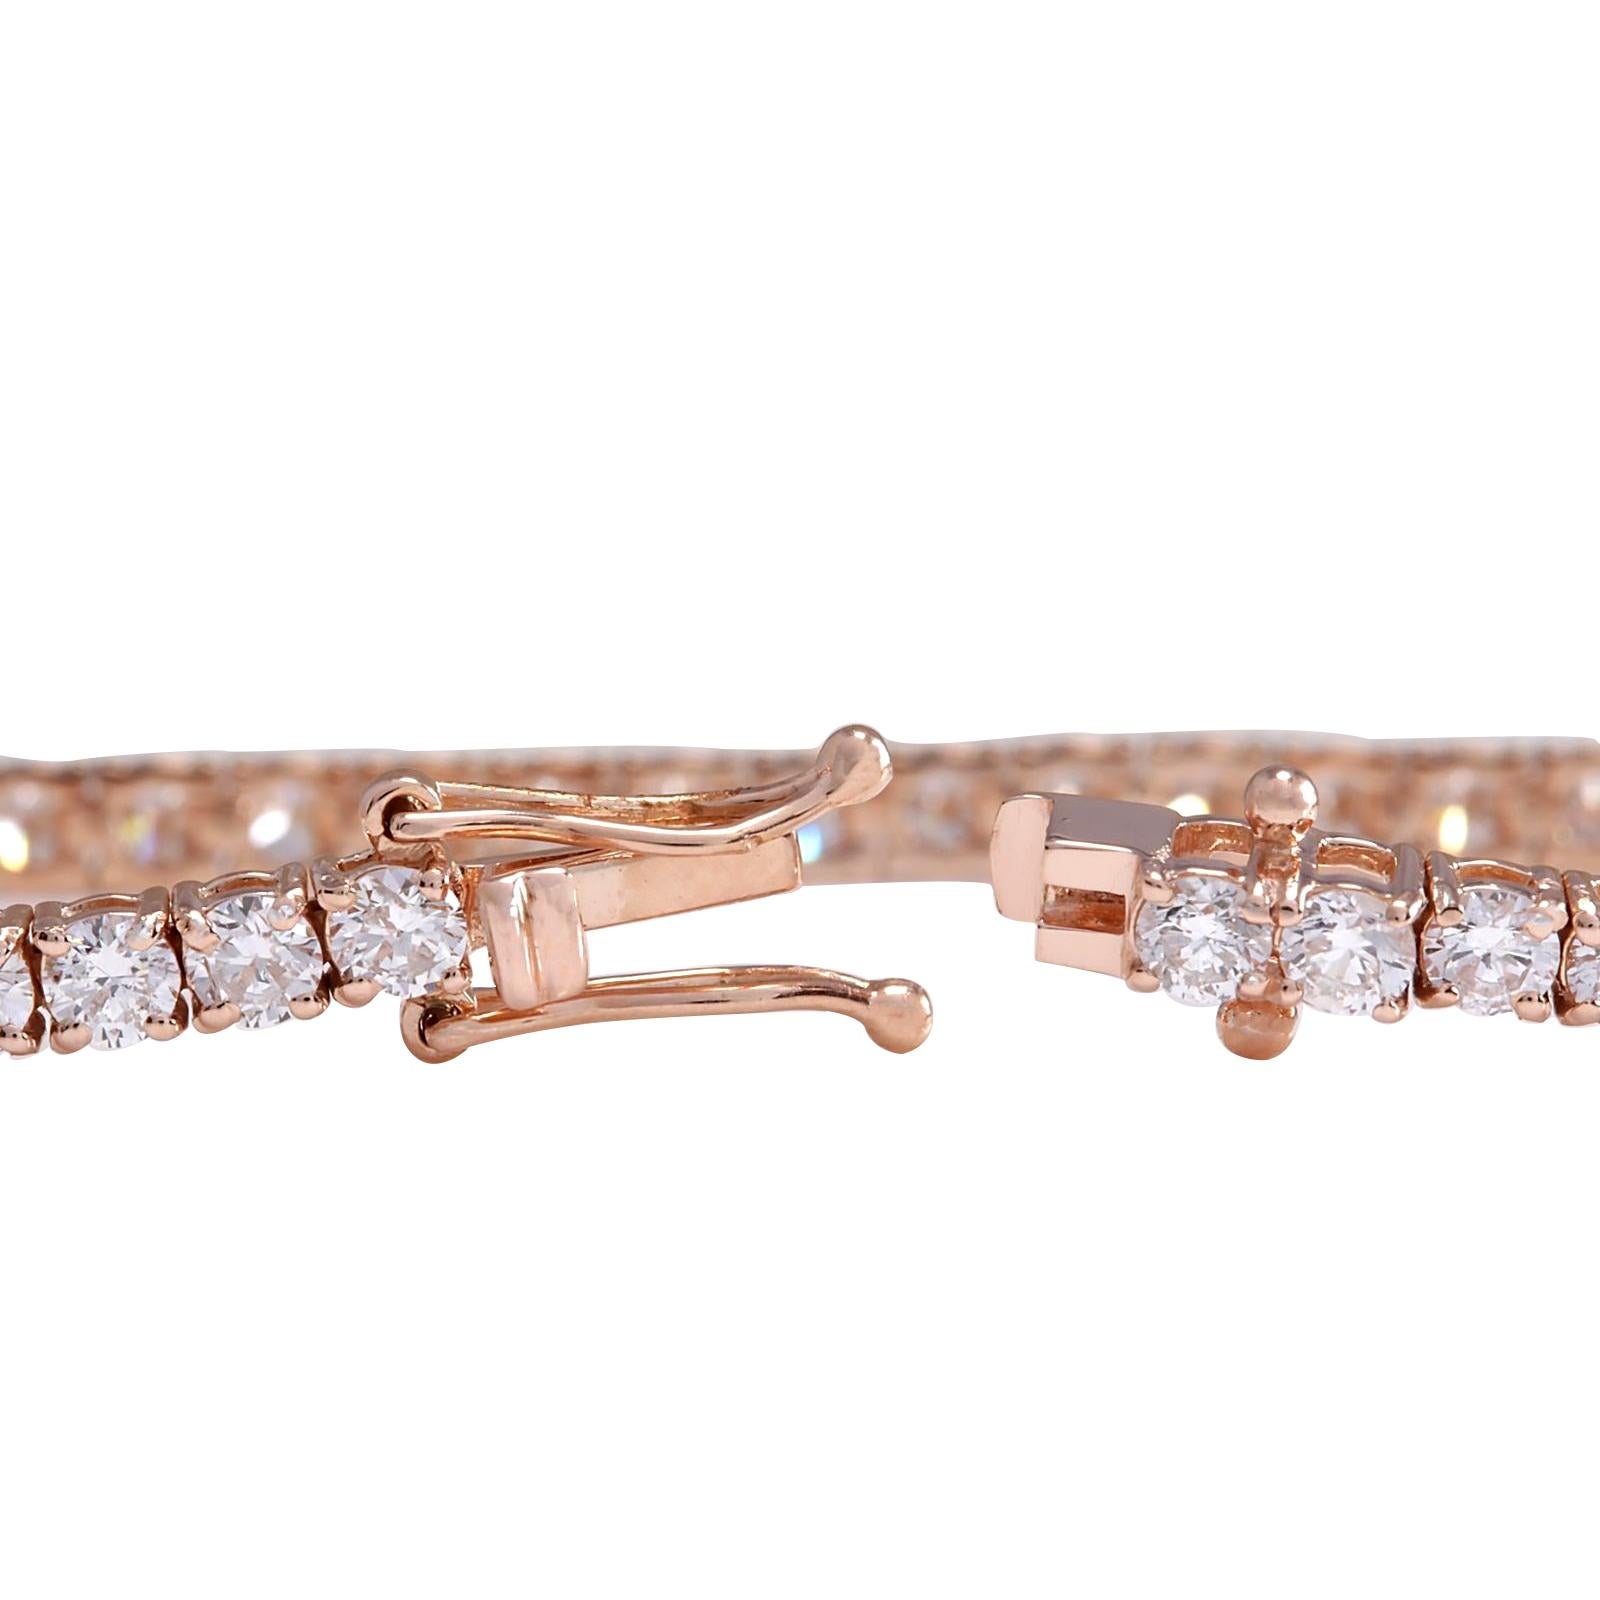 Stamped: 14K Rose Gold
Total Bracelet Weight: 8.1 Grams
Bracelet Length: 7 Inches
Bracelet Width: 2.70 mm
Total Natural Diamond Weight is 5.01 Carat
Color: F-G, Clarity: VS2-SI1
Face Measures: N/A
Sku: [702675W]